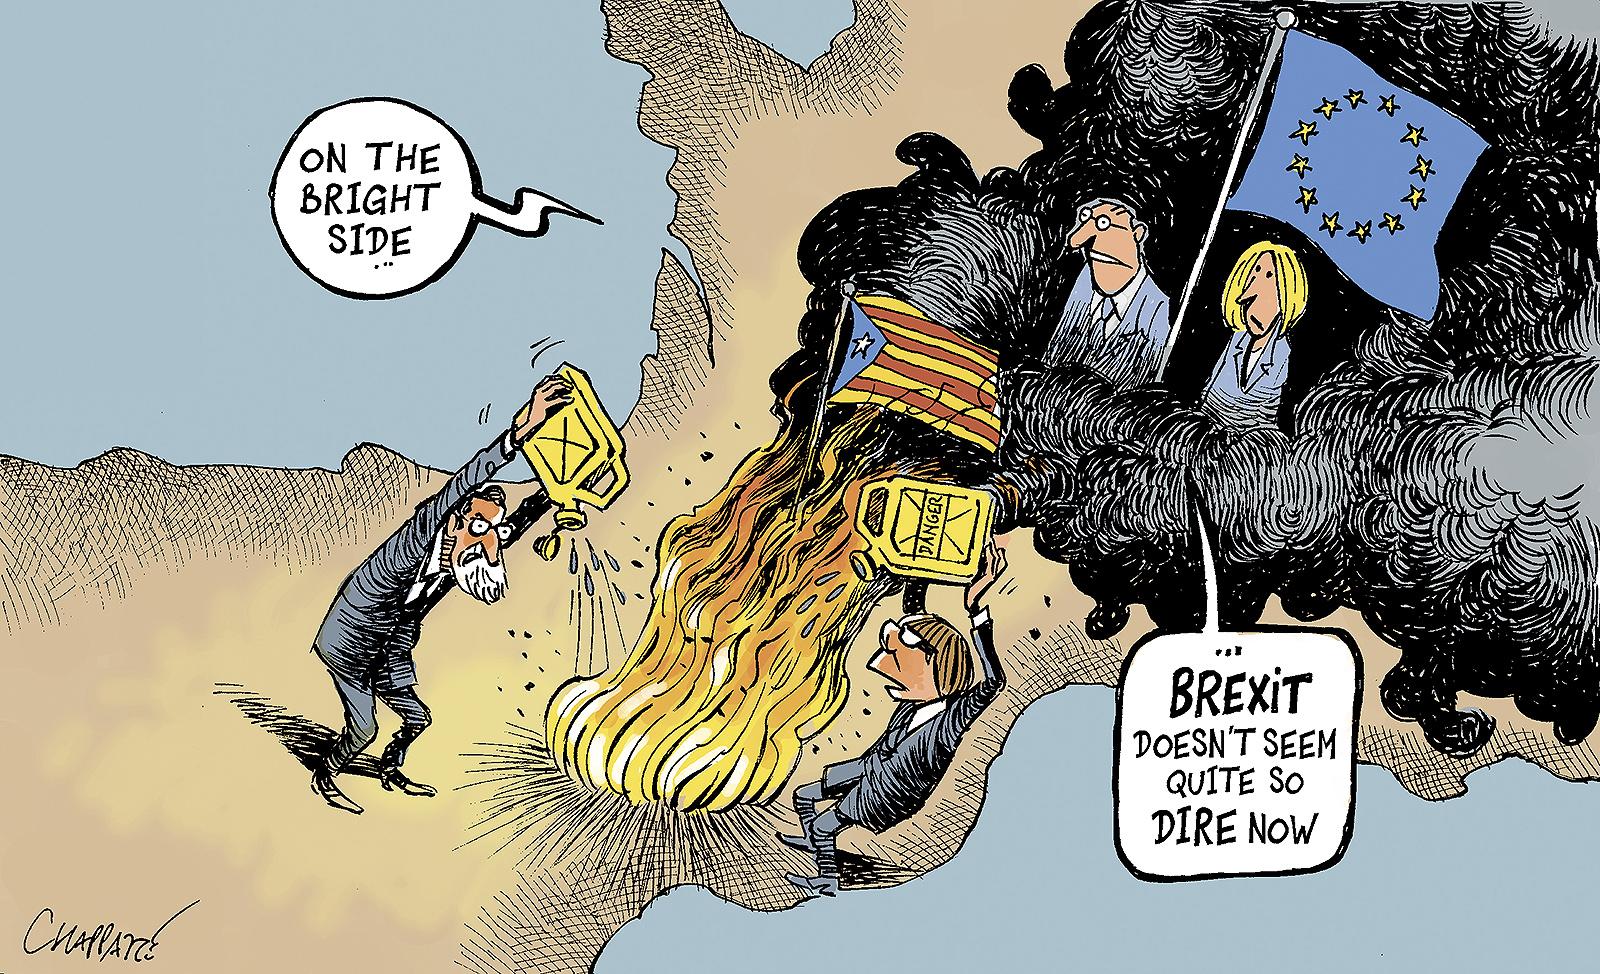 Catalonia's Independence